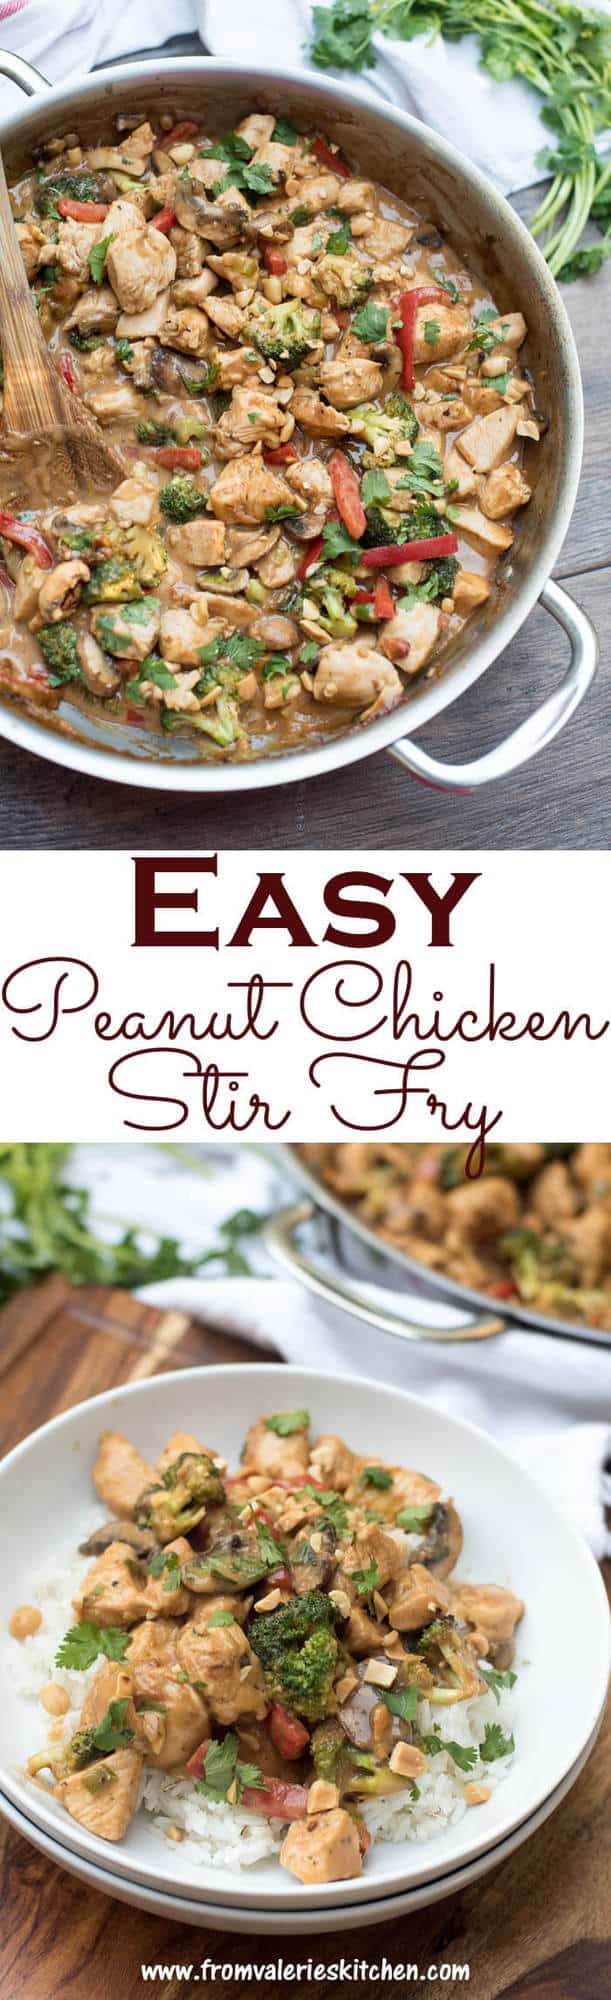 A two image vertical collage of Easy Peanut Chicken Stir Fry with text overlay.